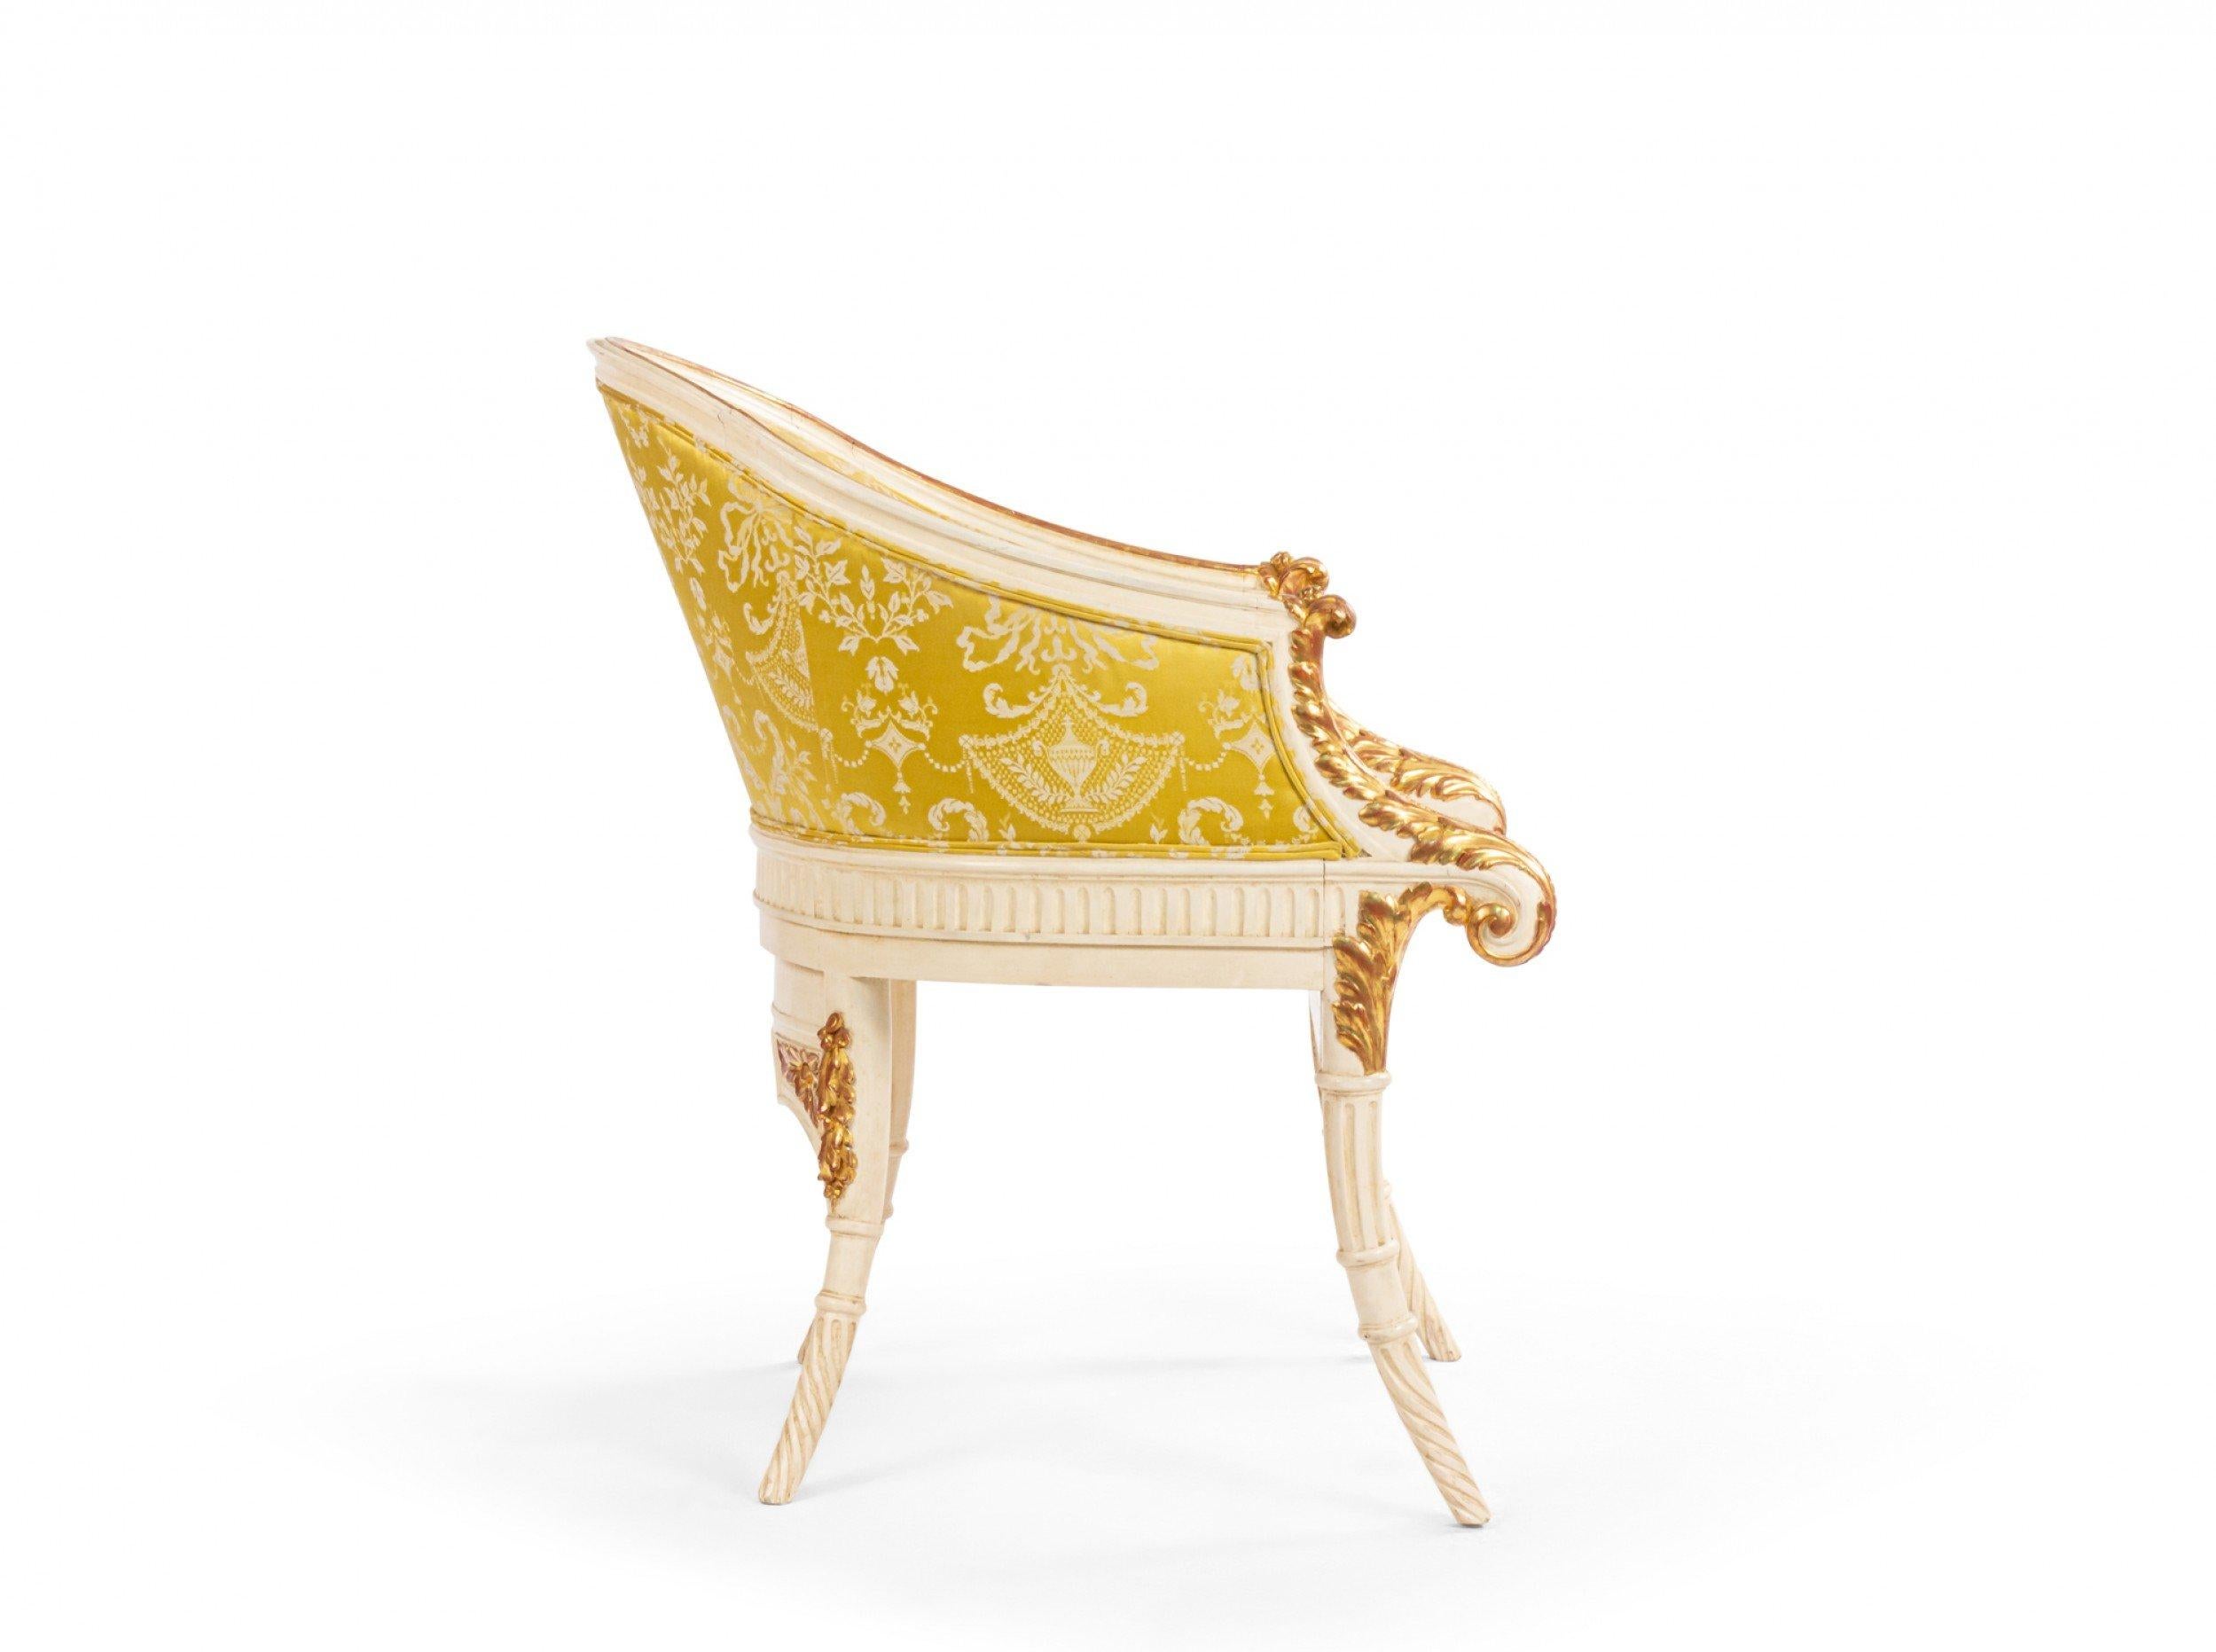 Italian neo-classic style 19th Century white and gold painted round back carved arm chair with front scroll design and gold damask upholstery.
 